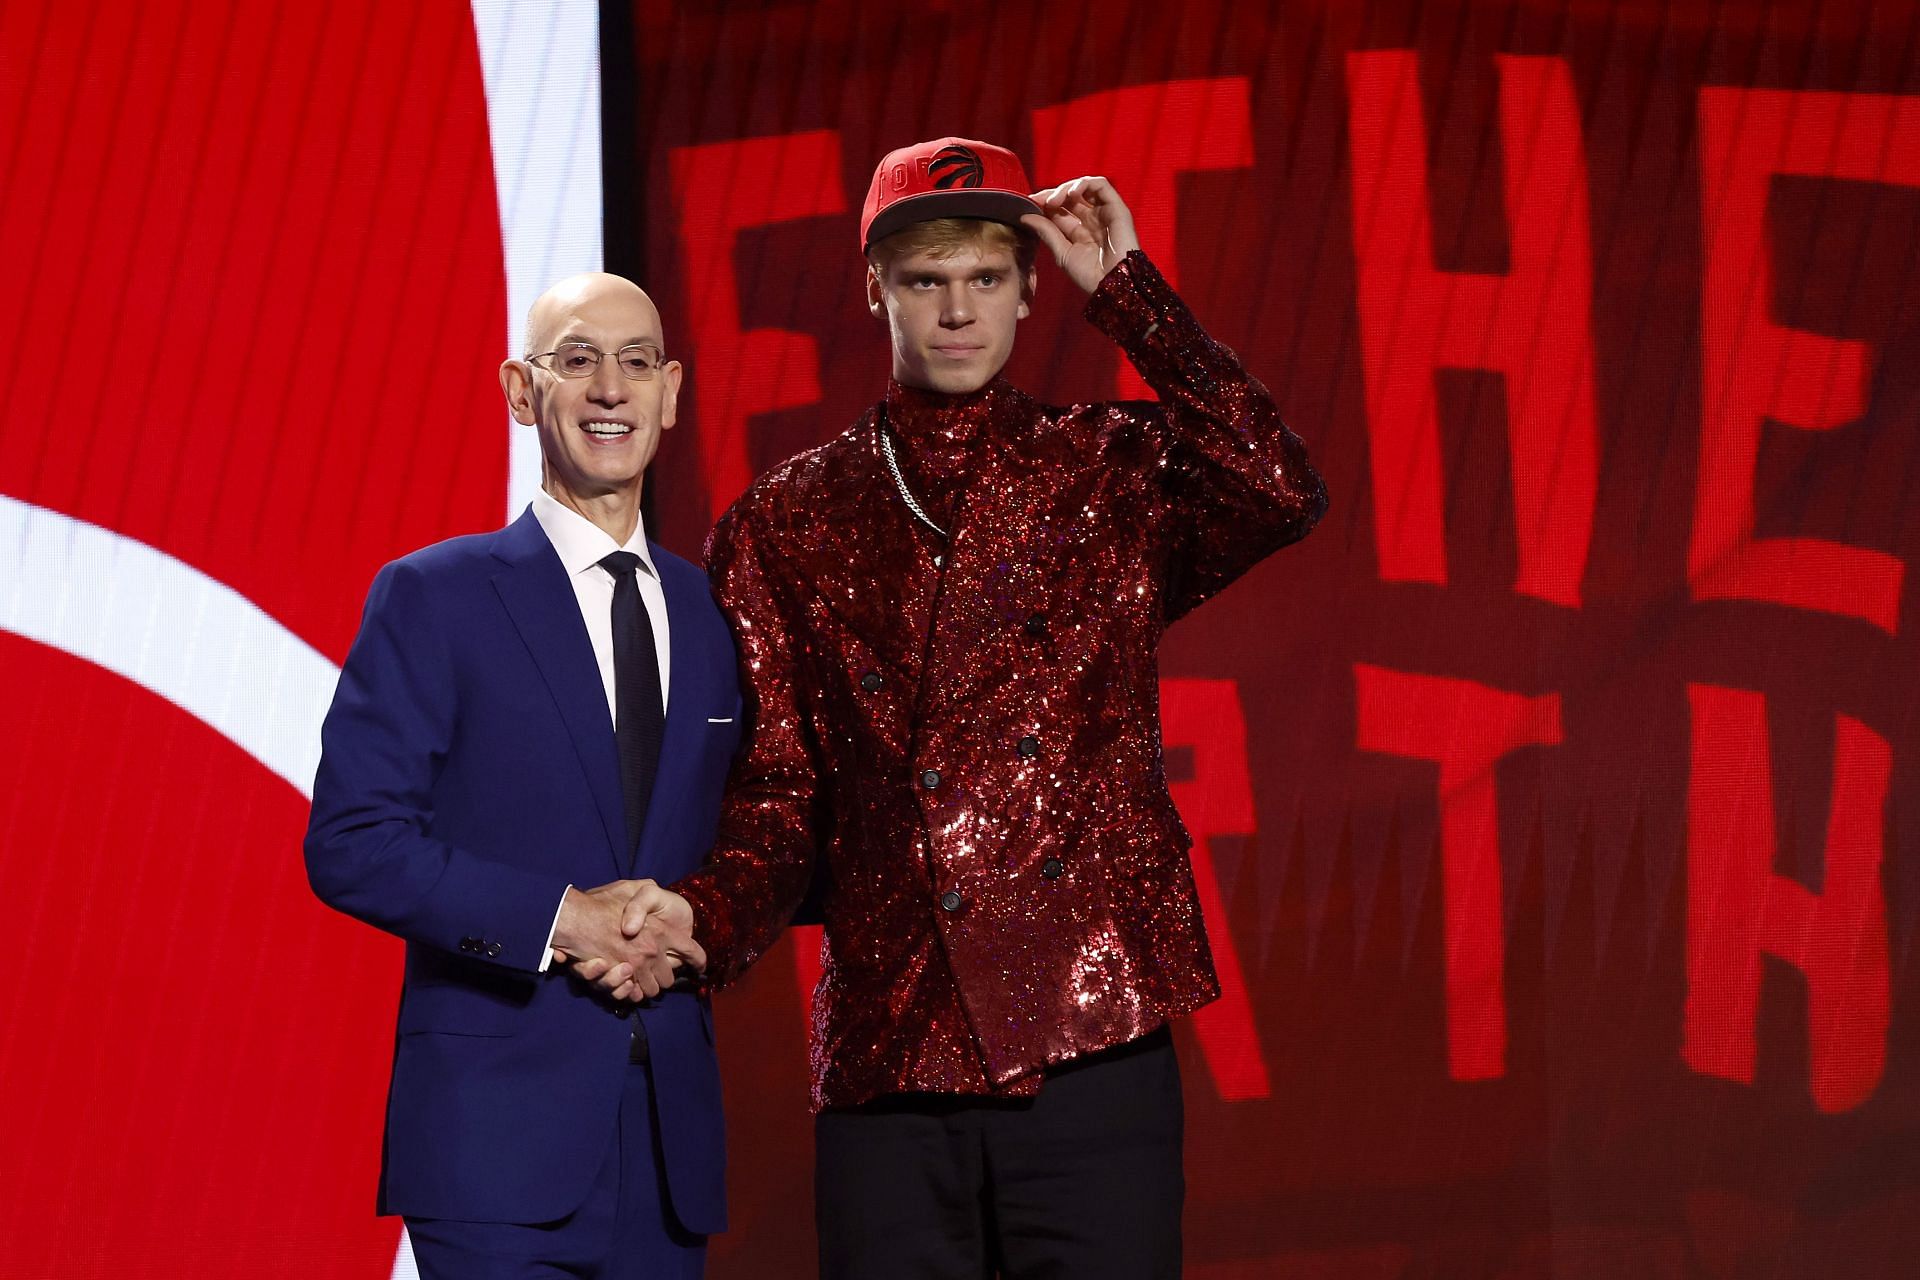 "They saw his suit and decided to draft him" NBA fans are in shambles